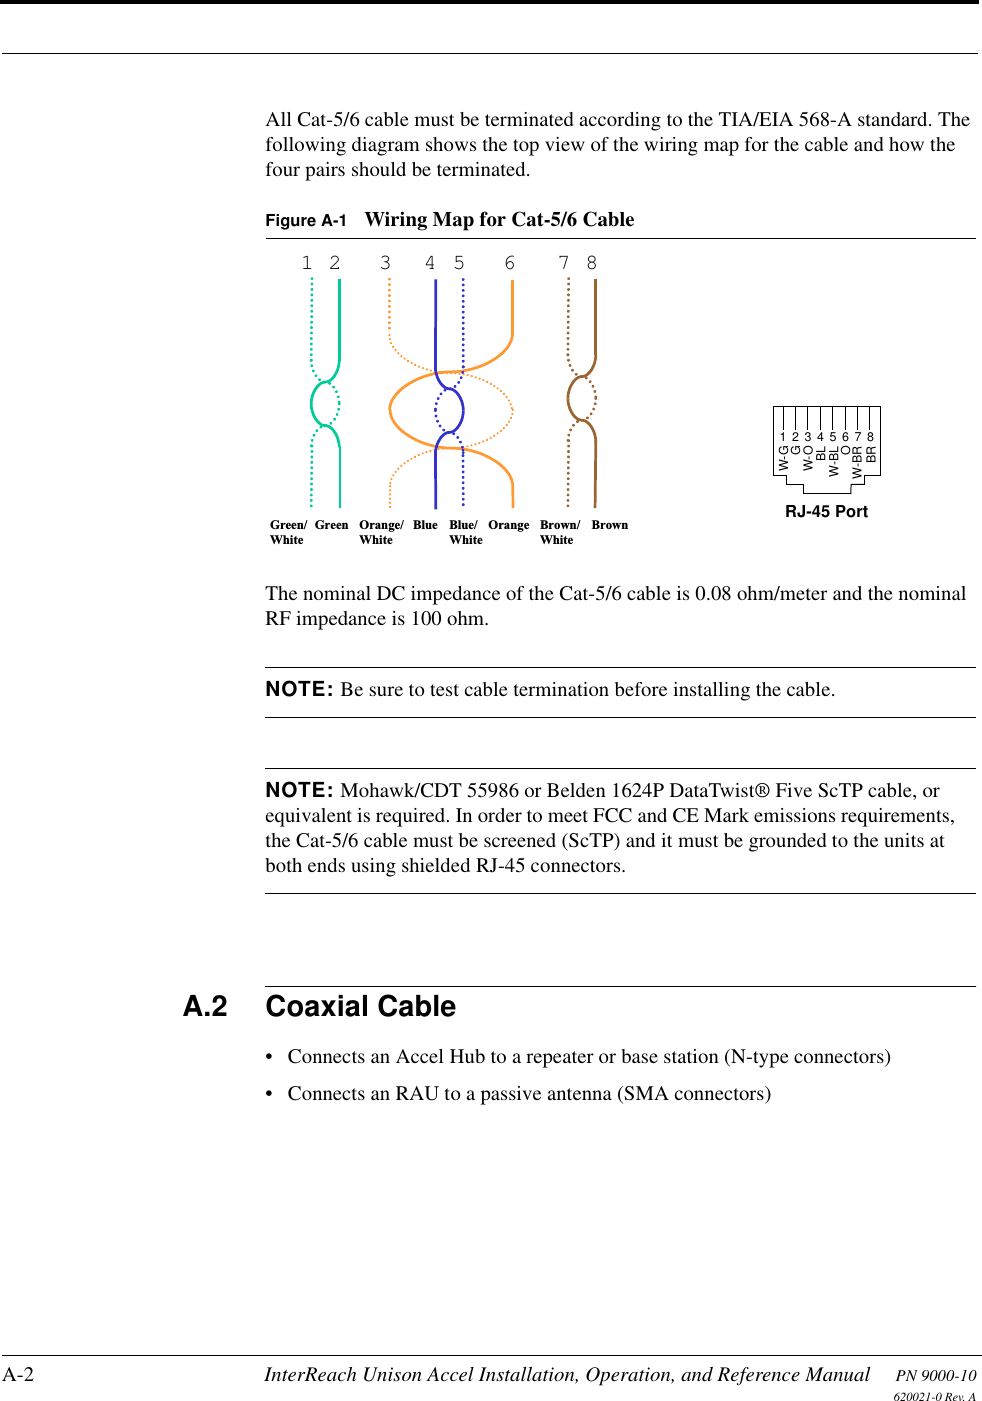 A-2 InterReach Unison Accel Installation, Operation, and Reference Manual PN 9000-10620021-0 Rev. AAll Cat-5/6 cable must be terminated according to the TIA/EIA 568-A standard. The following diagram shows the top view of the wiring map for the cable and how the four pairs should be terminated.Figure A-1 Wiring Map for Cat-5/6 CableThe nominal DC impedance of the Cat-5/6 cable is 0.08 ohm/meter and the nominal RF impedance is 100 ohm.NOTE: Be sure to test cable termination before installing the cable.NOTE: Mohawk/CDT 55986 or Belden 1624P DataTwist® Five ScTP cable, or equivalent is required. In order to meet FCC and CE Mark emissions requirements, the Cat-5/6 cable must be screened (ScTP) and it must be grounded to the units at both ends using shielded RJ-45 connectors.A.2 Coaxial Cable• Connects an Accel Hub to a repeater or base station (N-type connectors)• Connects an RAU to a passive antenna (SMA connectors)12 3 45 6 78BrownBrown/WhiteBlue Blue/WhiteGreen/WhiteGreen OrangeOrange/WhiteRJ-45 Port12345678W-GGW-OBLW-BLOW-BRBR